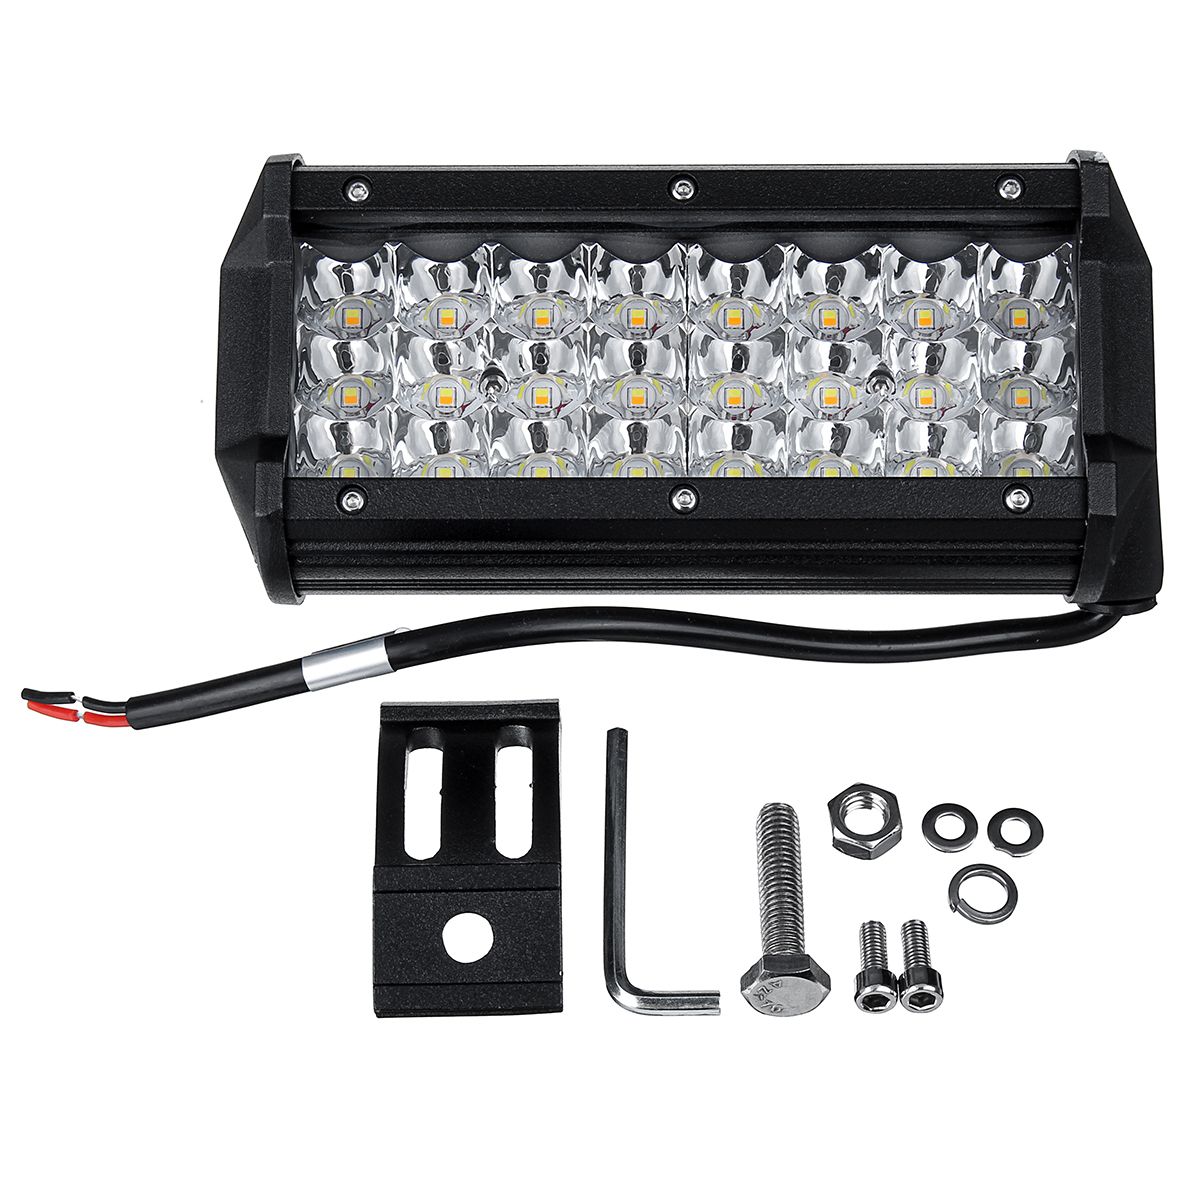 7-Inch-72W-LED-Work-Light-Bar-Dual-Color-Strobe-Flash-Driving-Fog-Lamp-WhiteAmber-Waterproof-for-Off-1606113